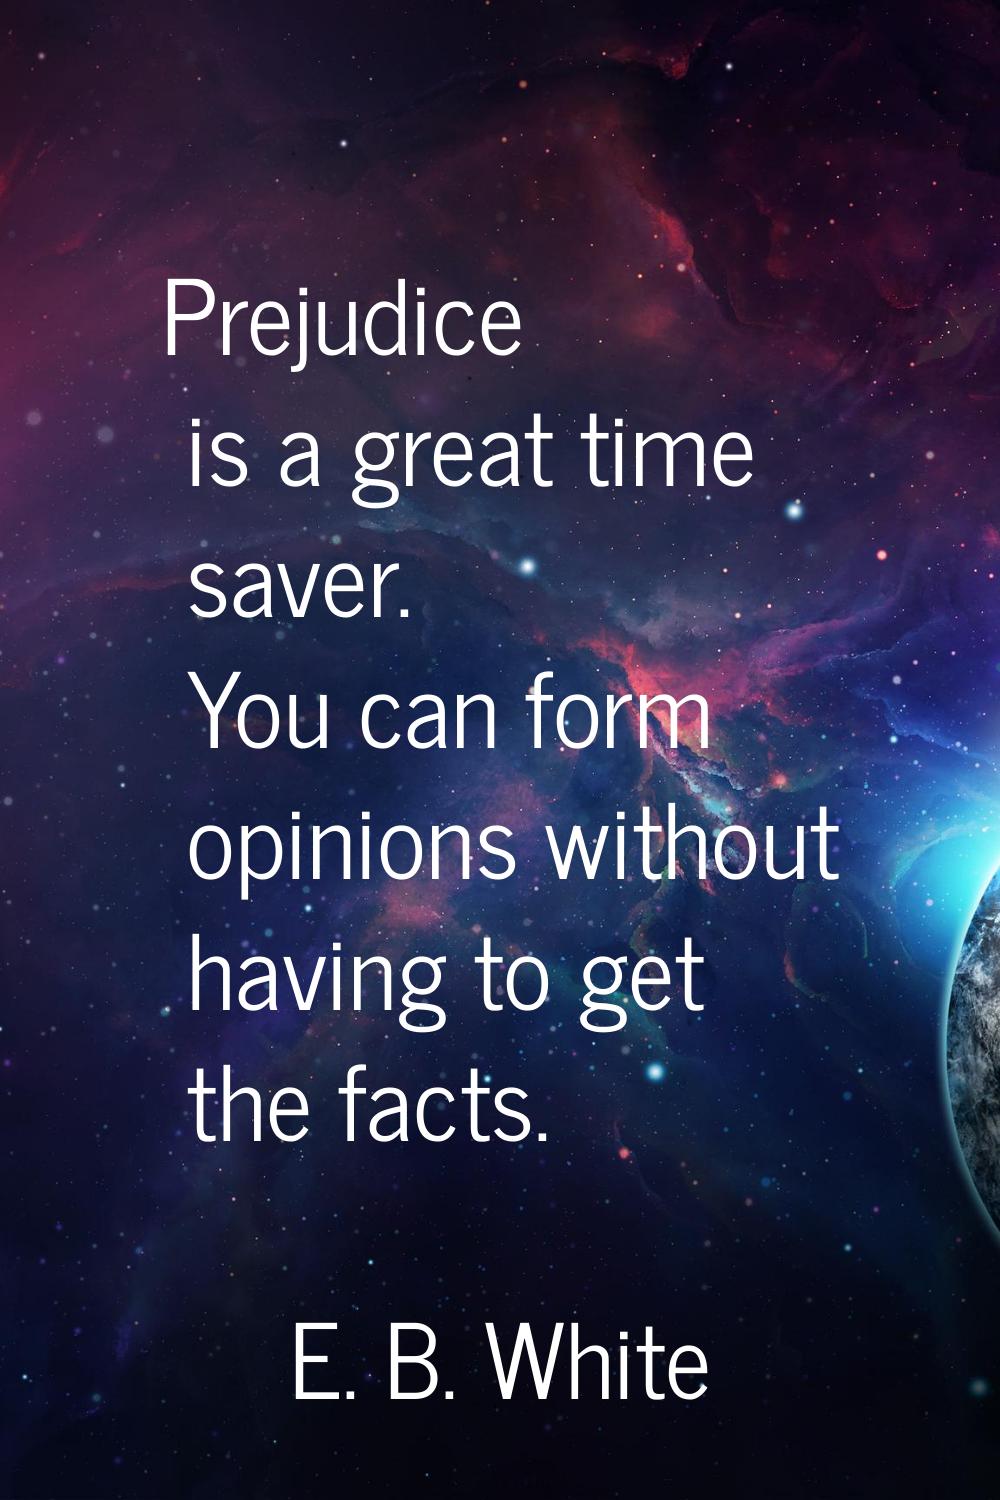 Prejudice is a great time saver. You can form opinions without having to get the facts.